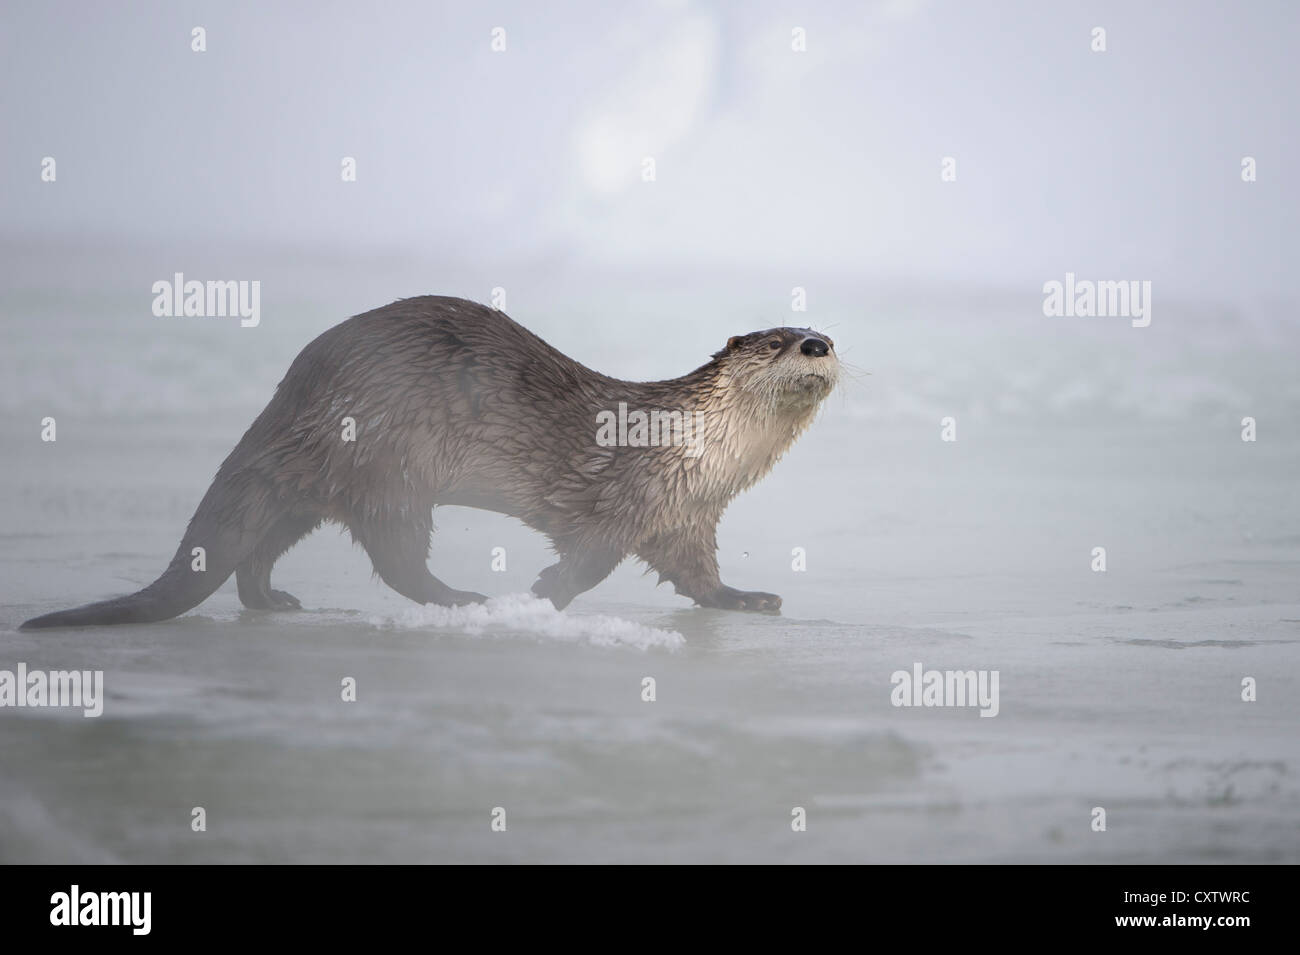 A River Otter (Lontra canadensis) walking on a frozen portion of a river, Northern Rockies Stock Photo